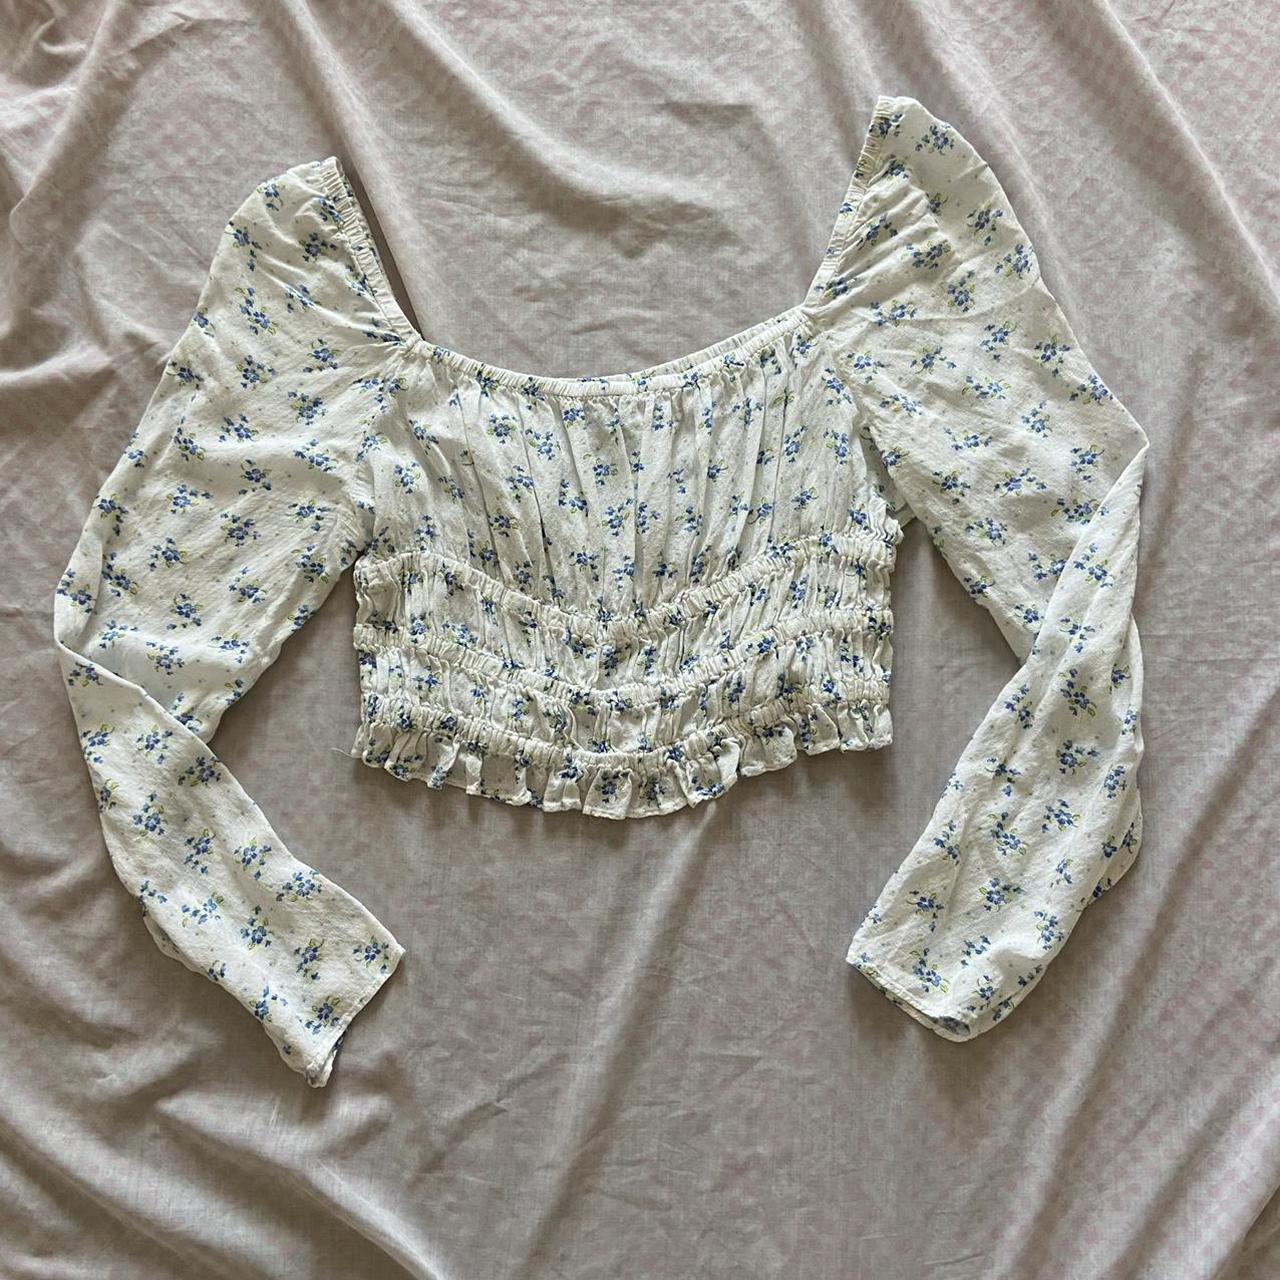 Urban Outfitters Women's Blue and White Blouse | Depop